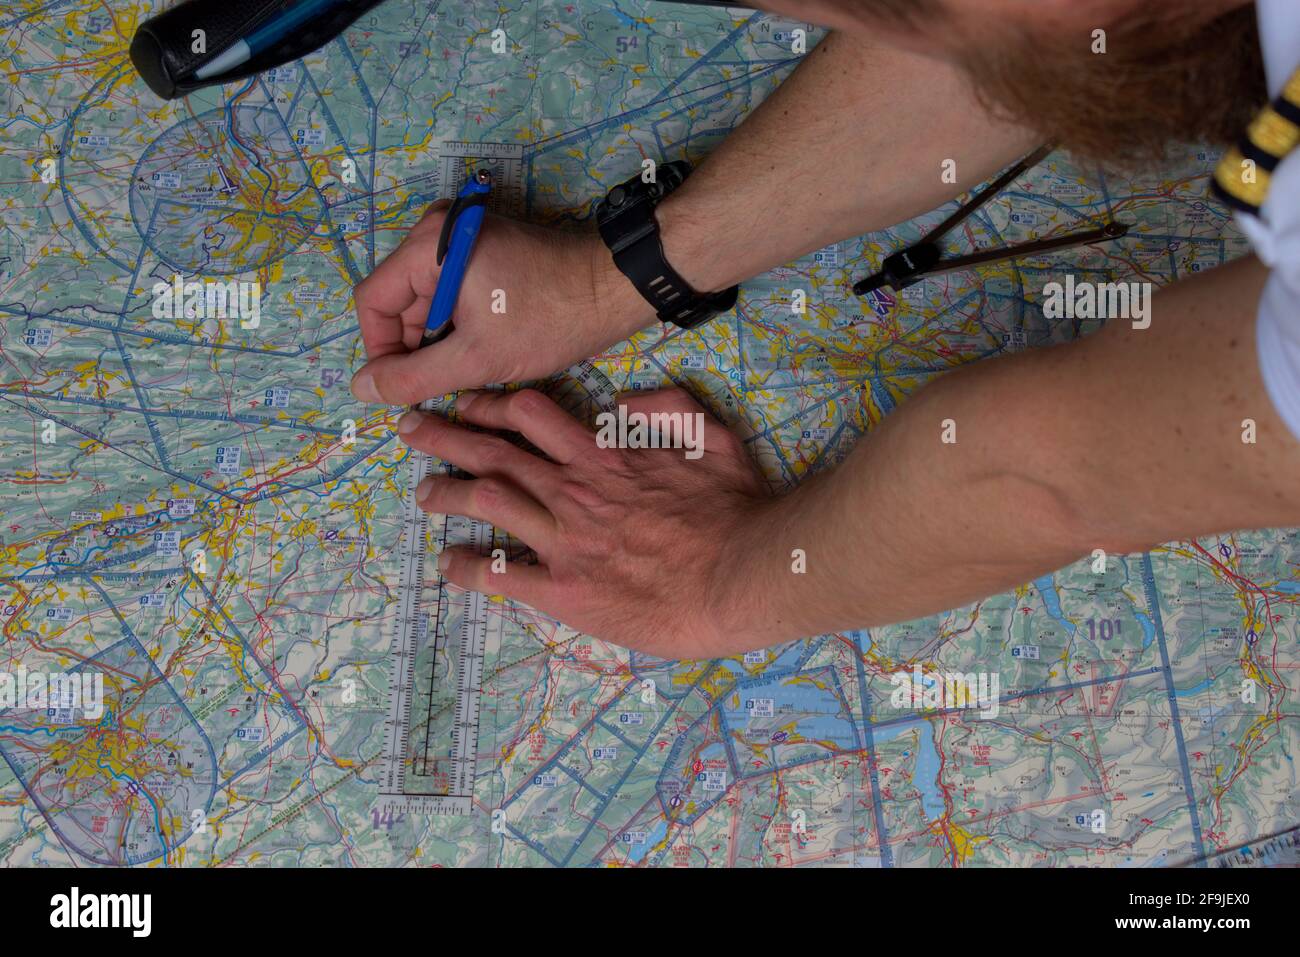 Pilot is calculating his navigation route on an actual map 25.3.2021 Stock Photo